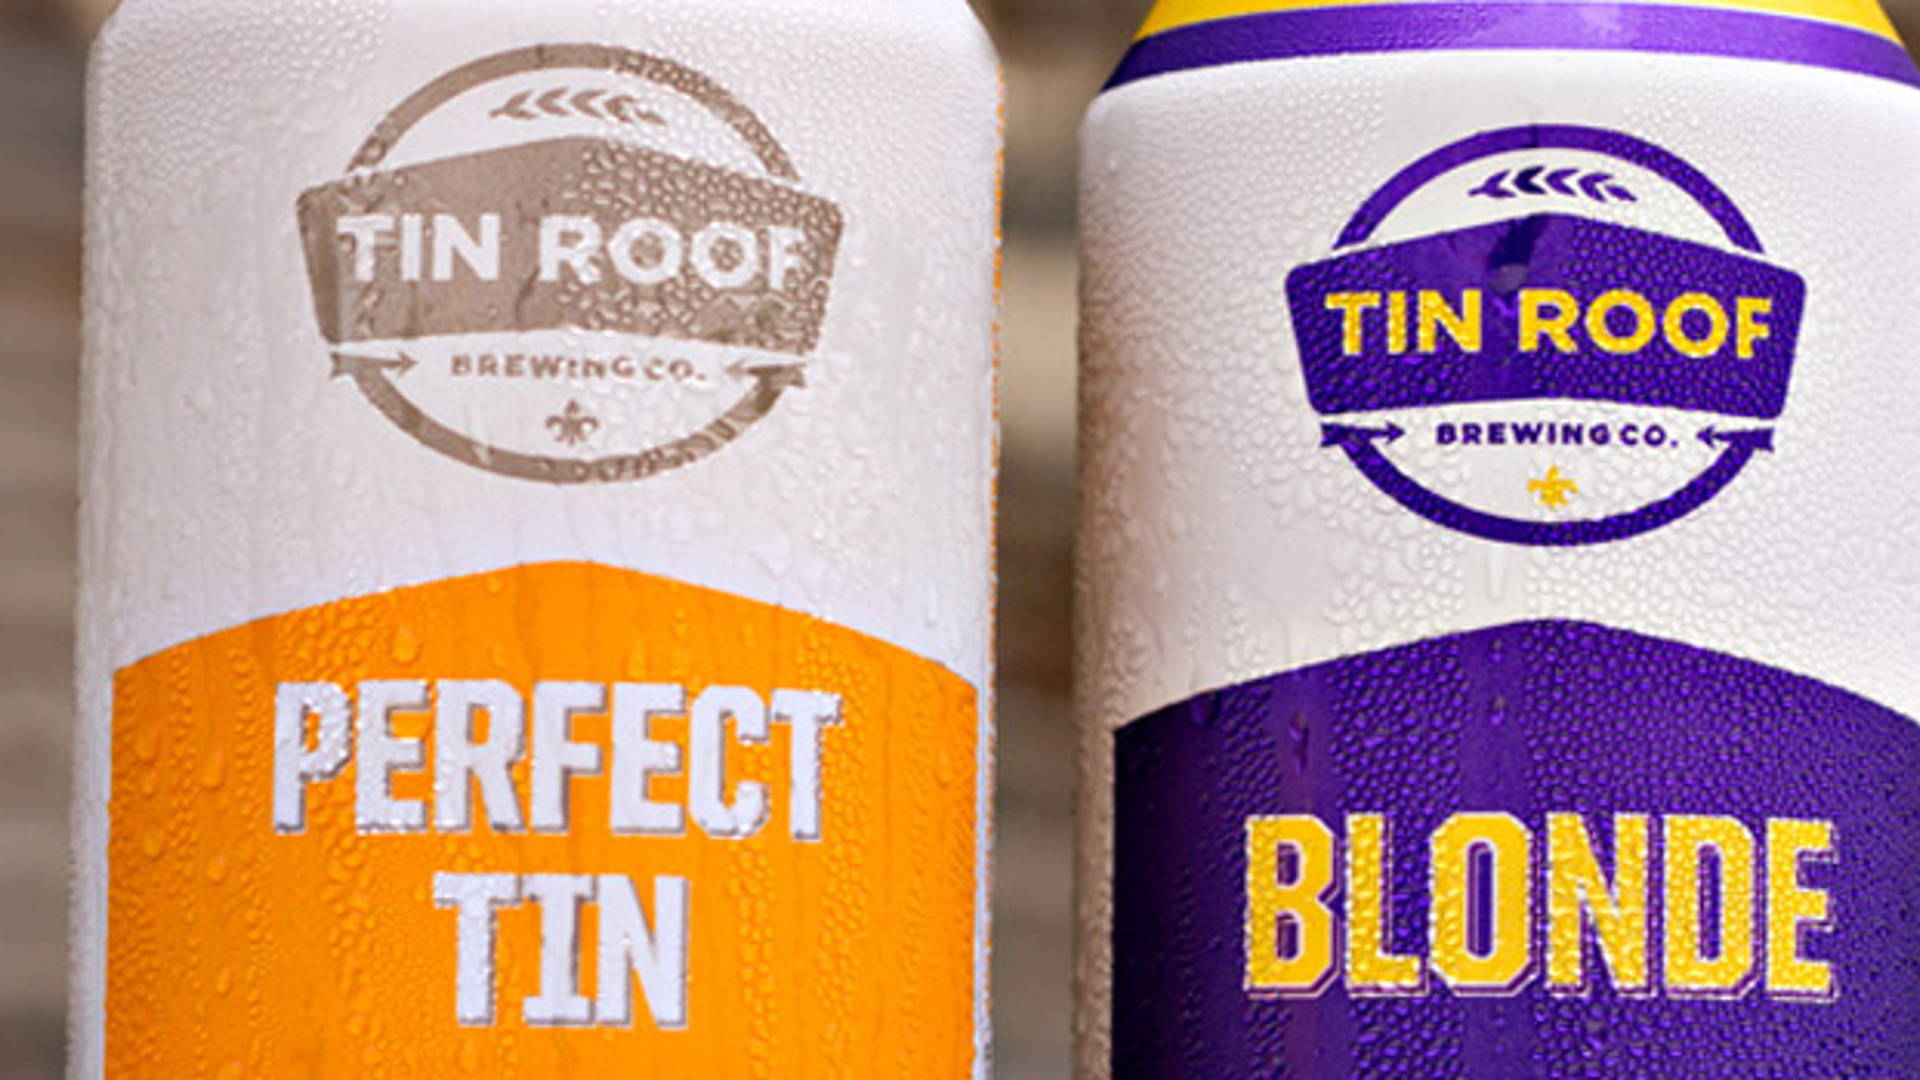 Featured image for Tin Roof Brewing Co.